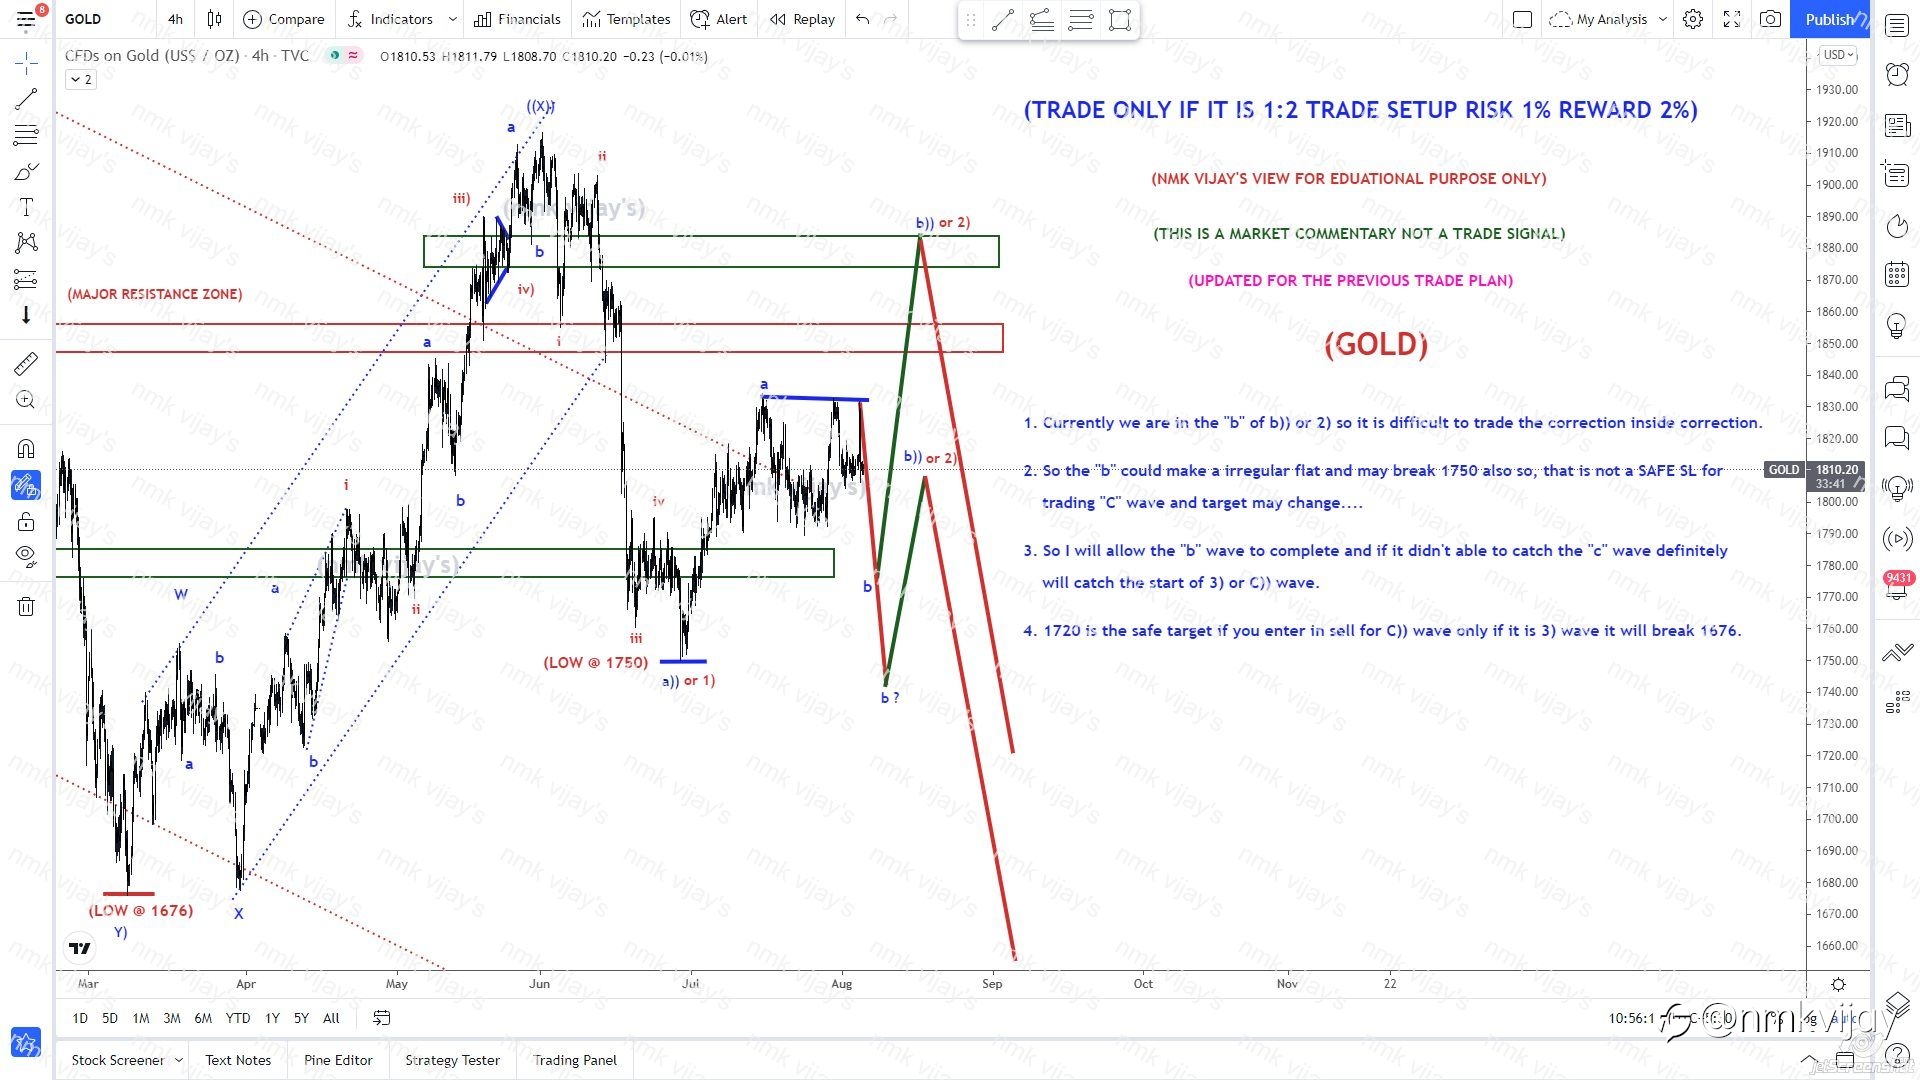 GOLD-We are in b of b)) or 2) allow to complete trade only c)